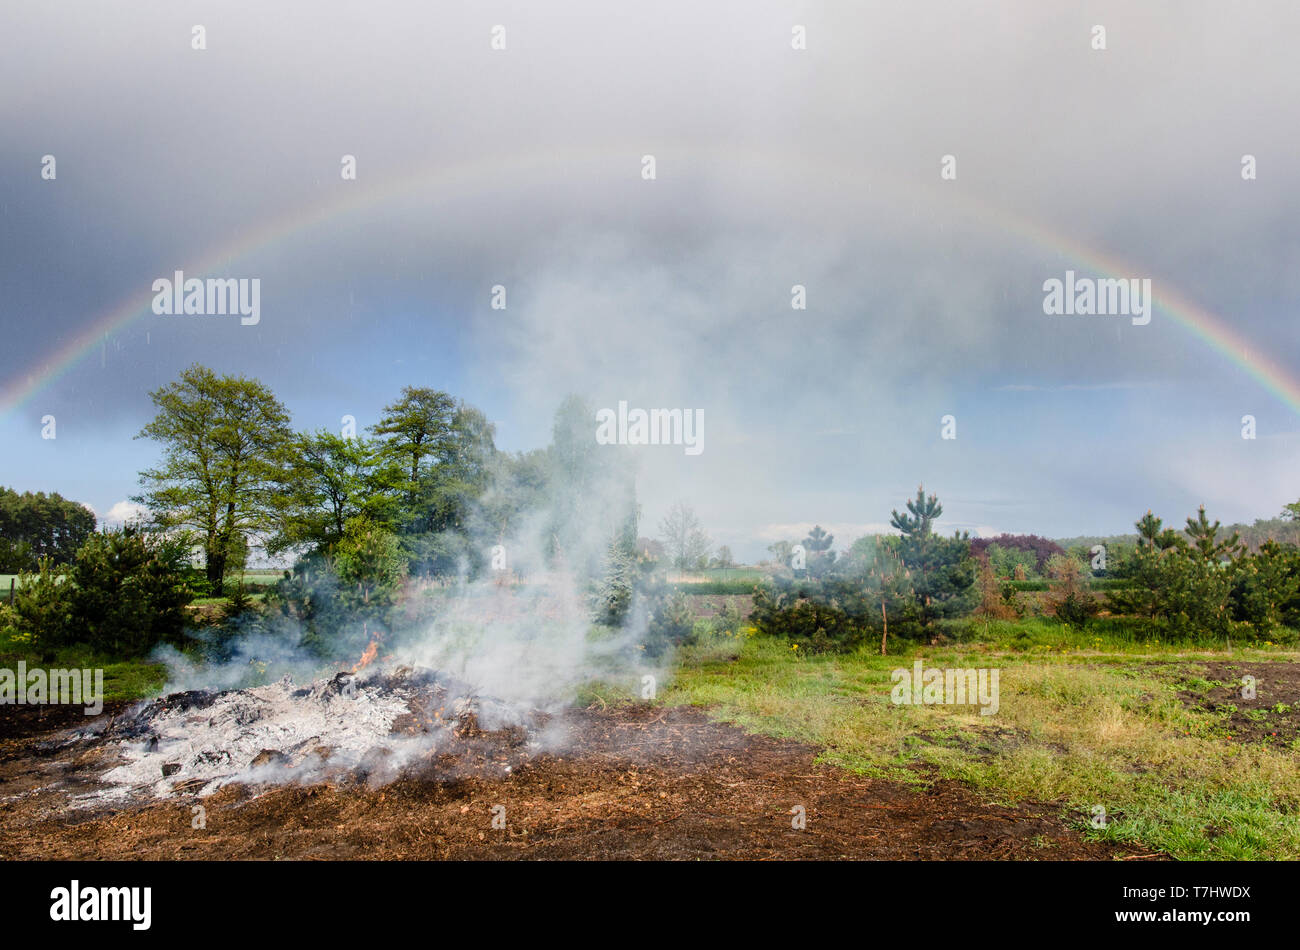 smoke from a large rural bonfire in the countryside slowly rising into the clouds filled sky with a beautiful rainbow during slight rain Stock Photo